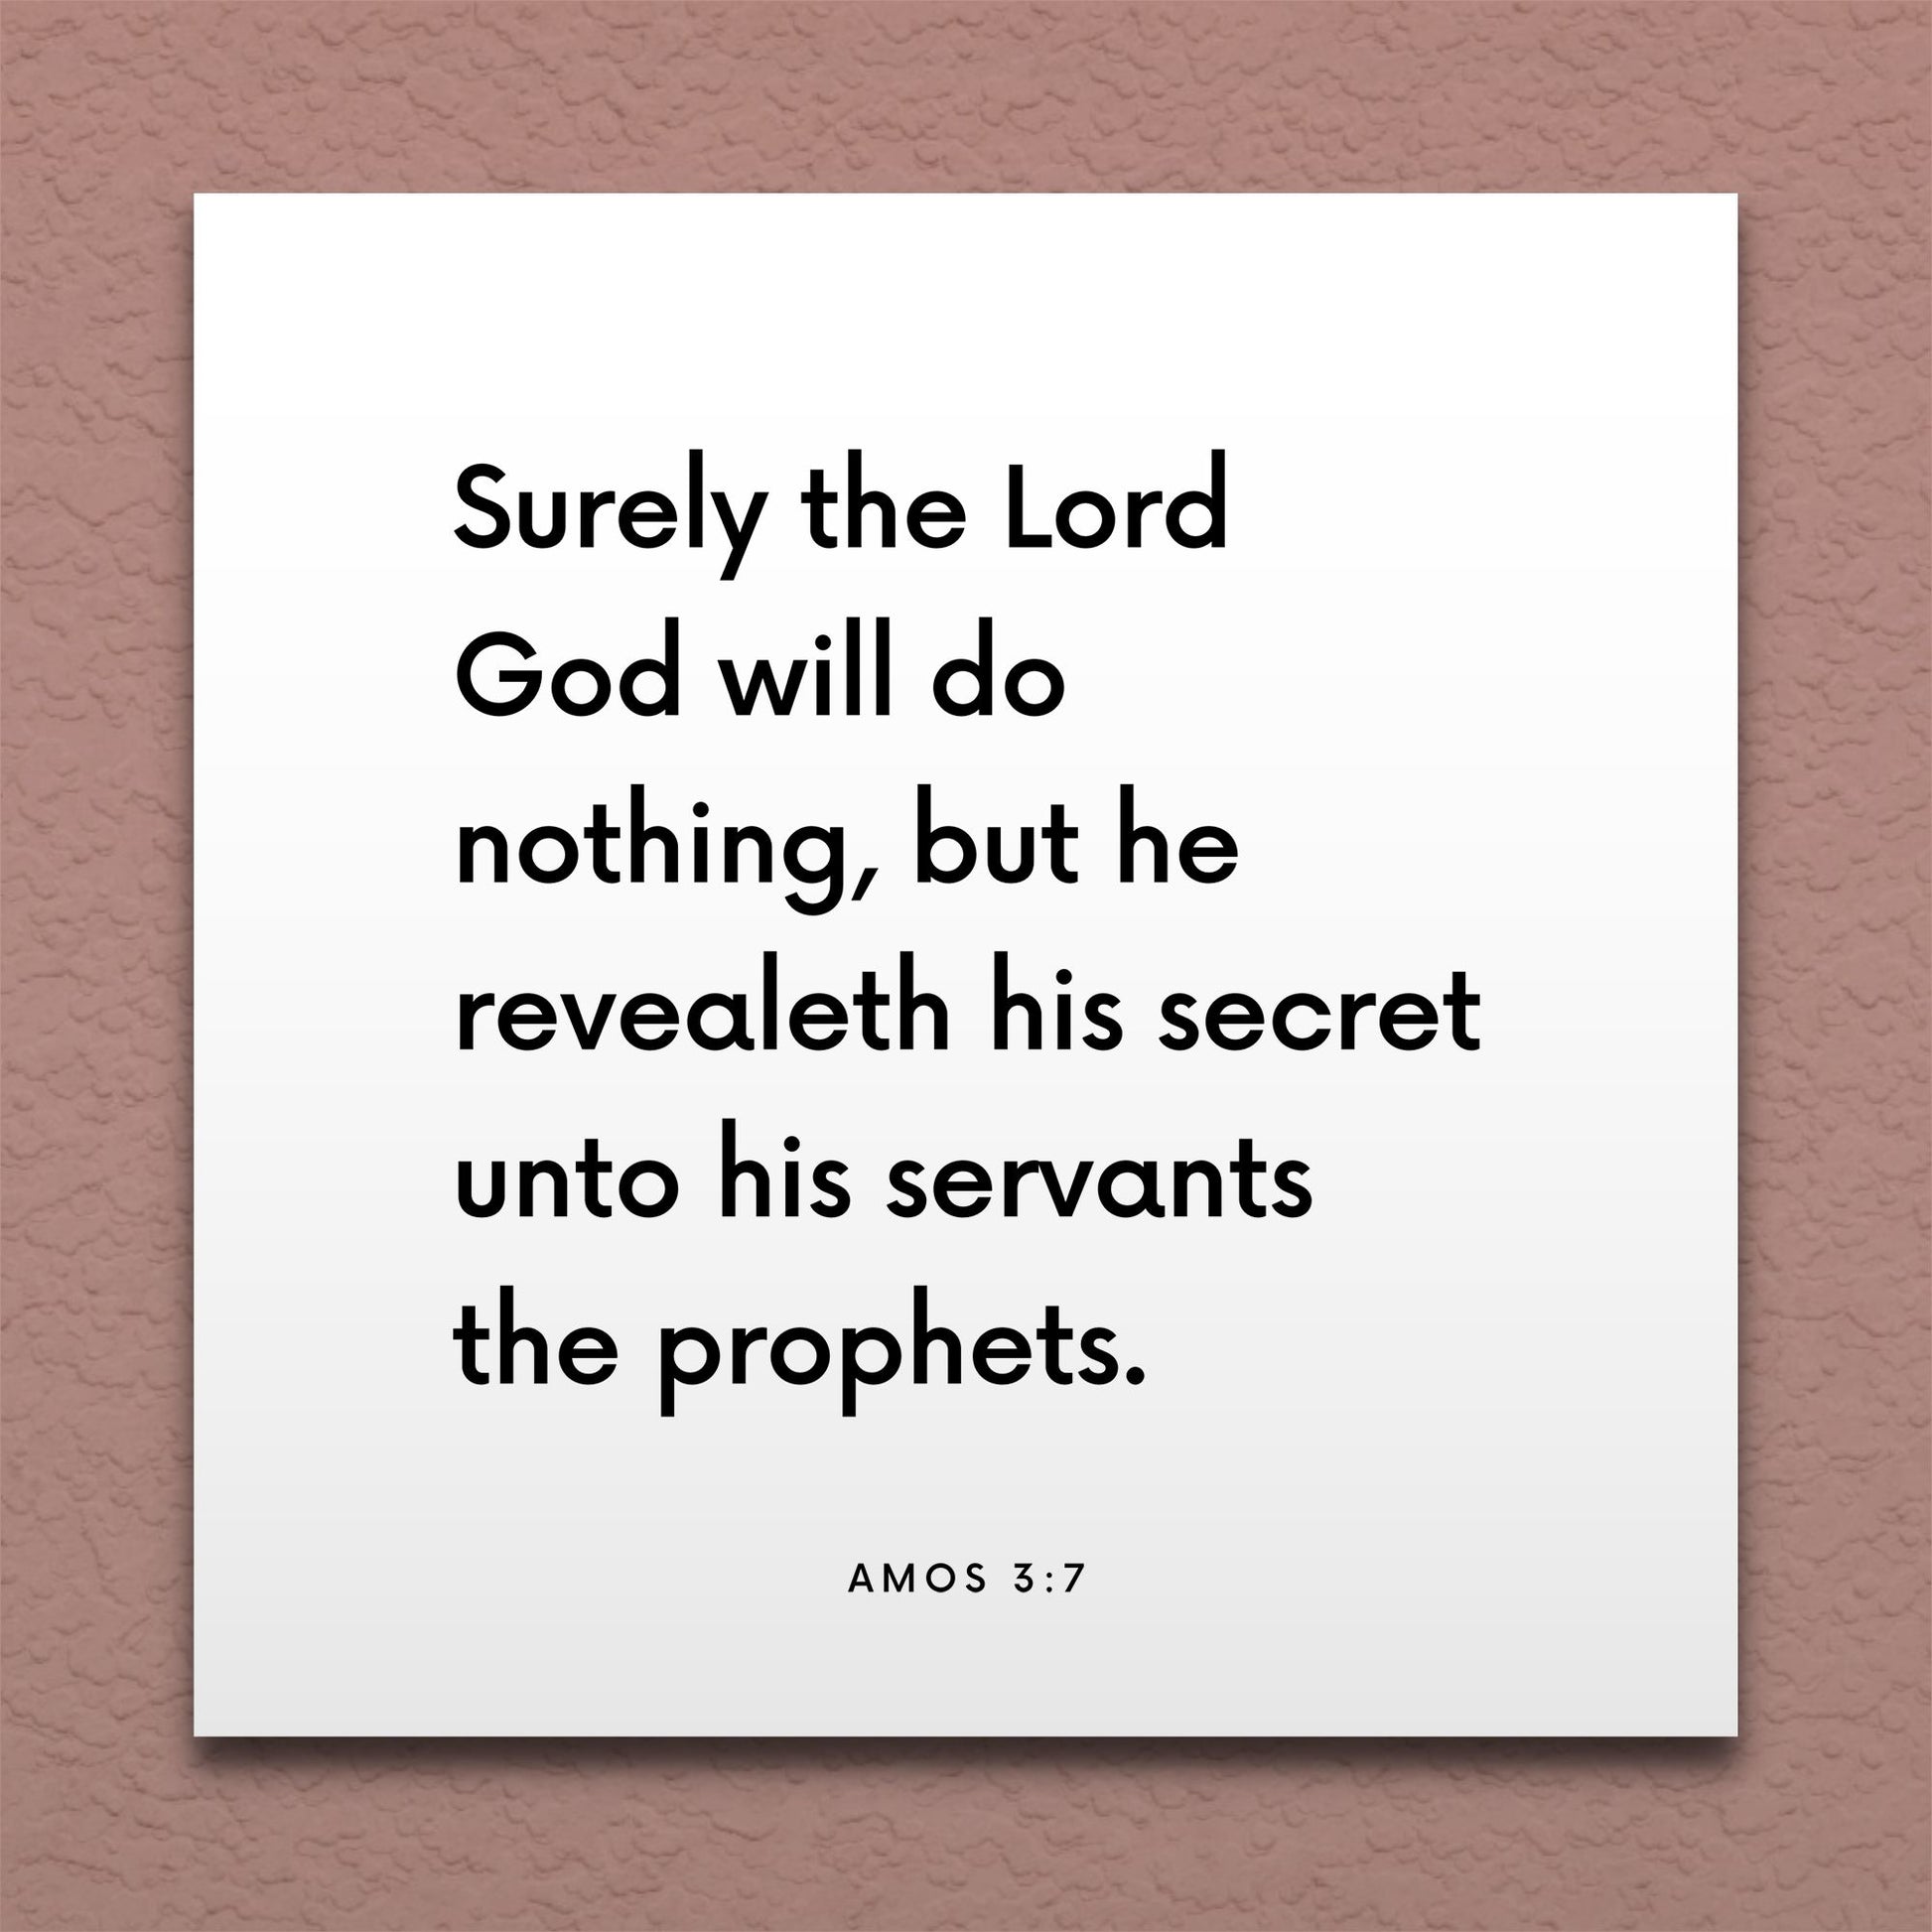 Wall-mounted scripture tile for Amos 3:7 - "He revealeth his secret unto his servants the prophets"